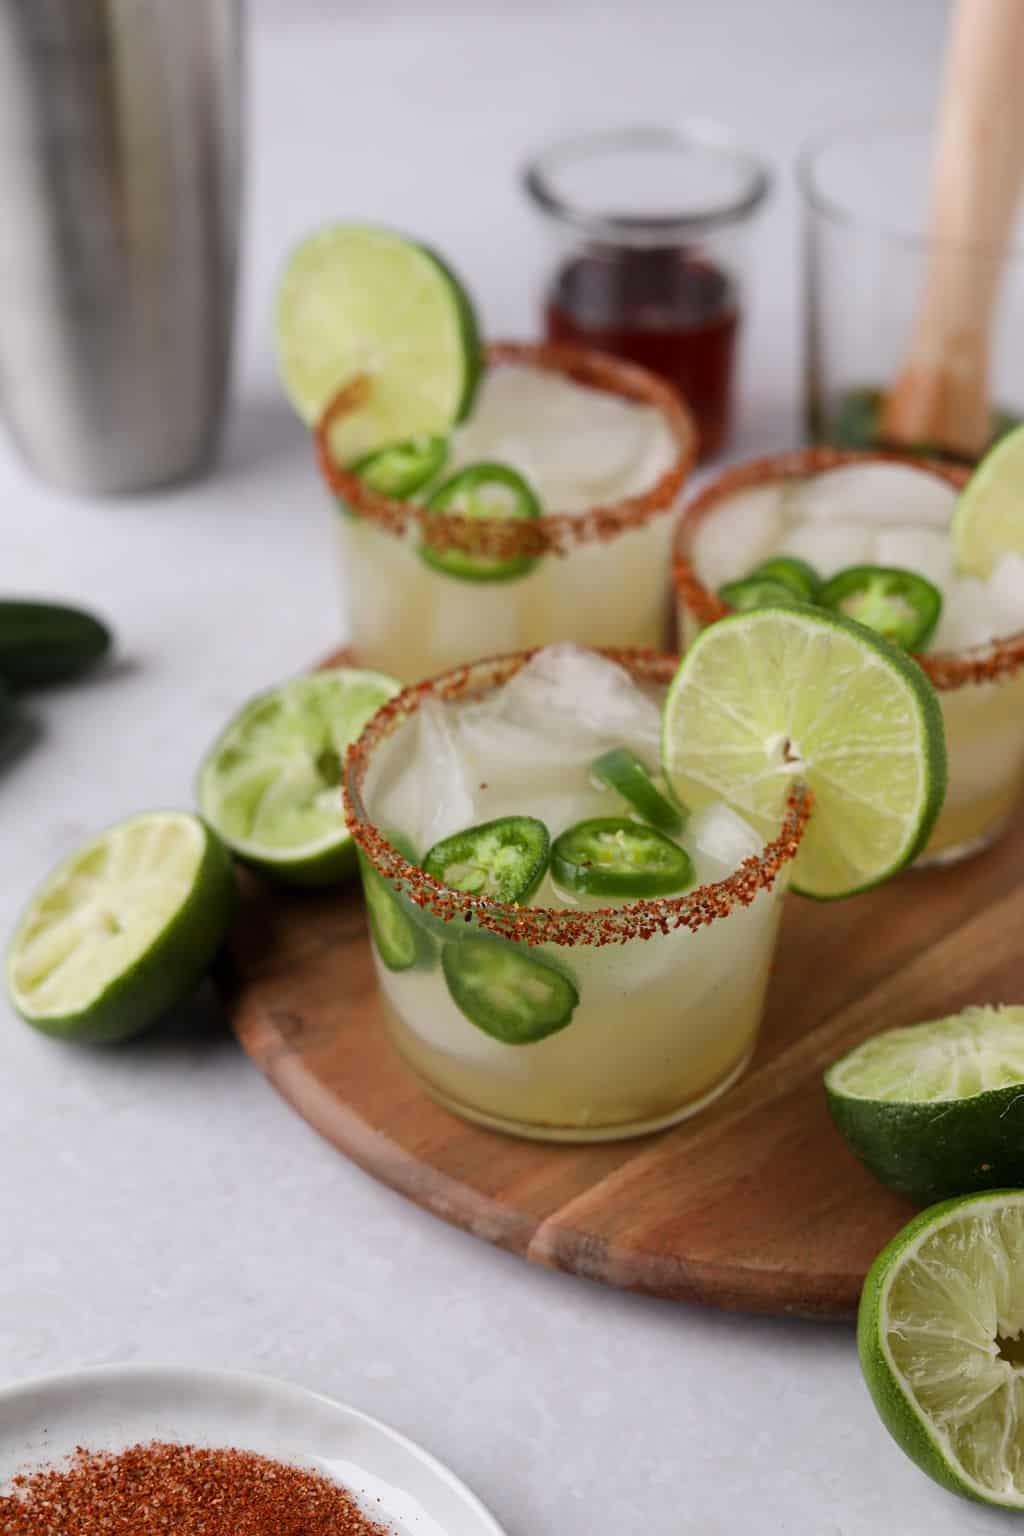 Jalapeno margaritas on board with jalapeno slices.